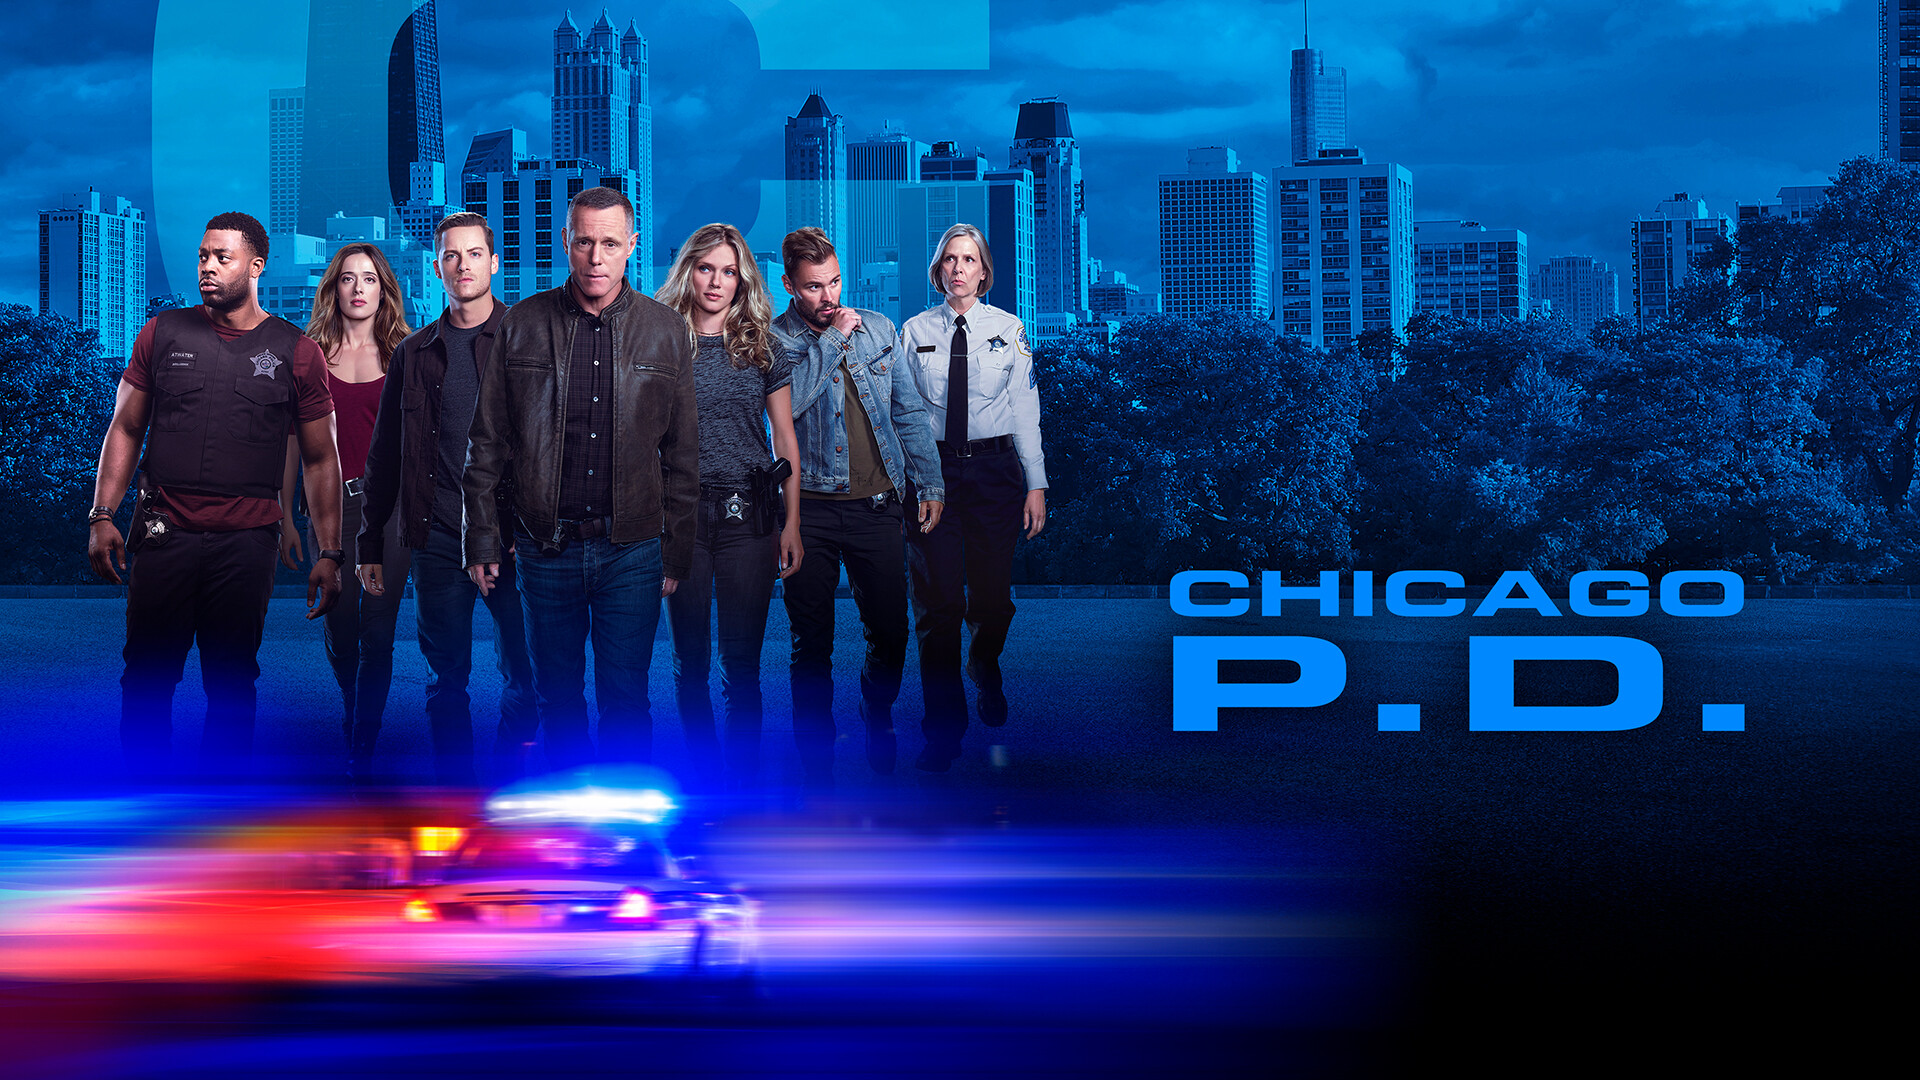 Chicago P.D. (TV Series): American Police Procedural Action Drama, 186 Episodes Over 9 Seasons. 1920x1080 Full HD Background.